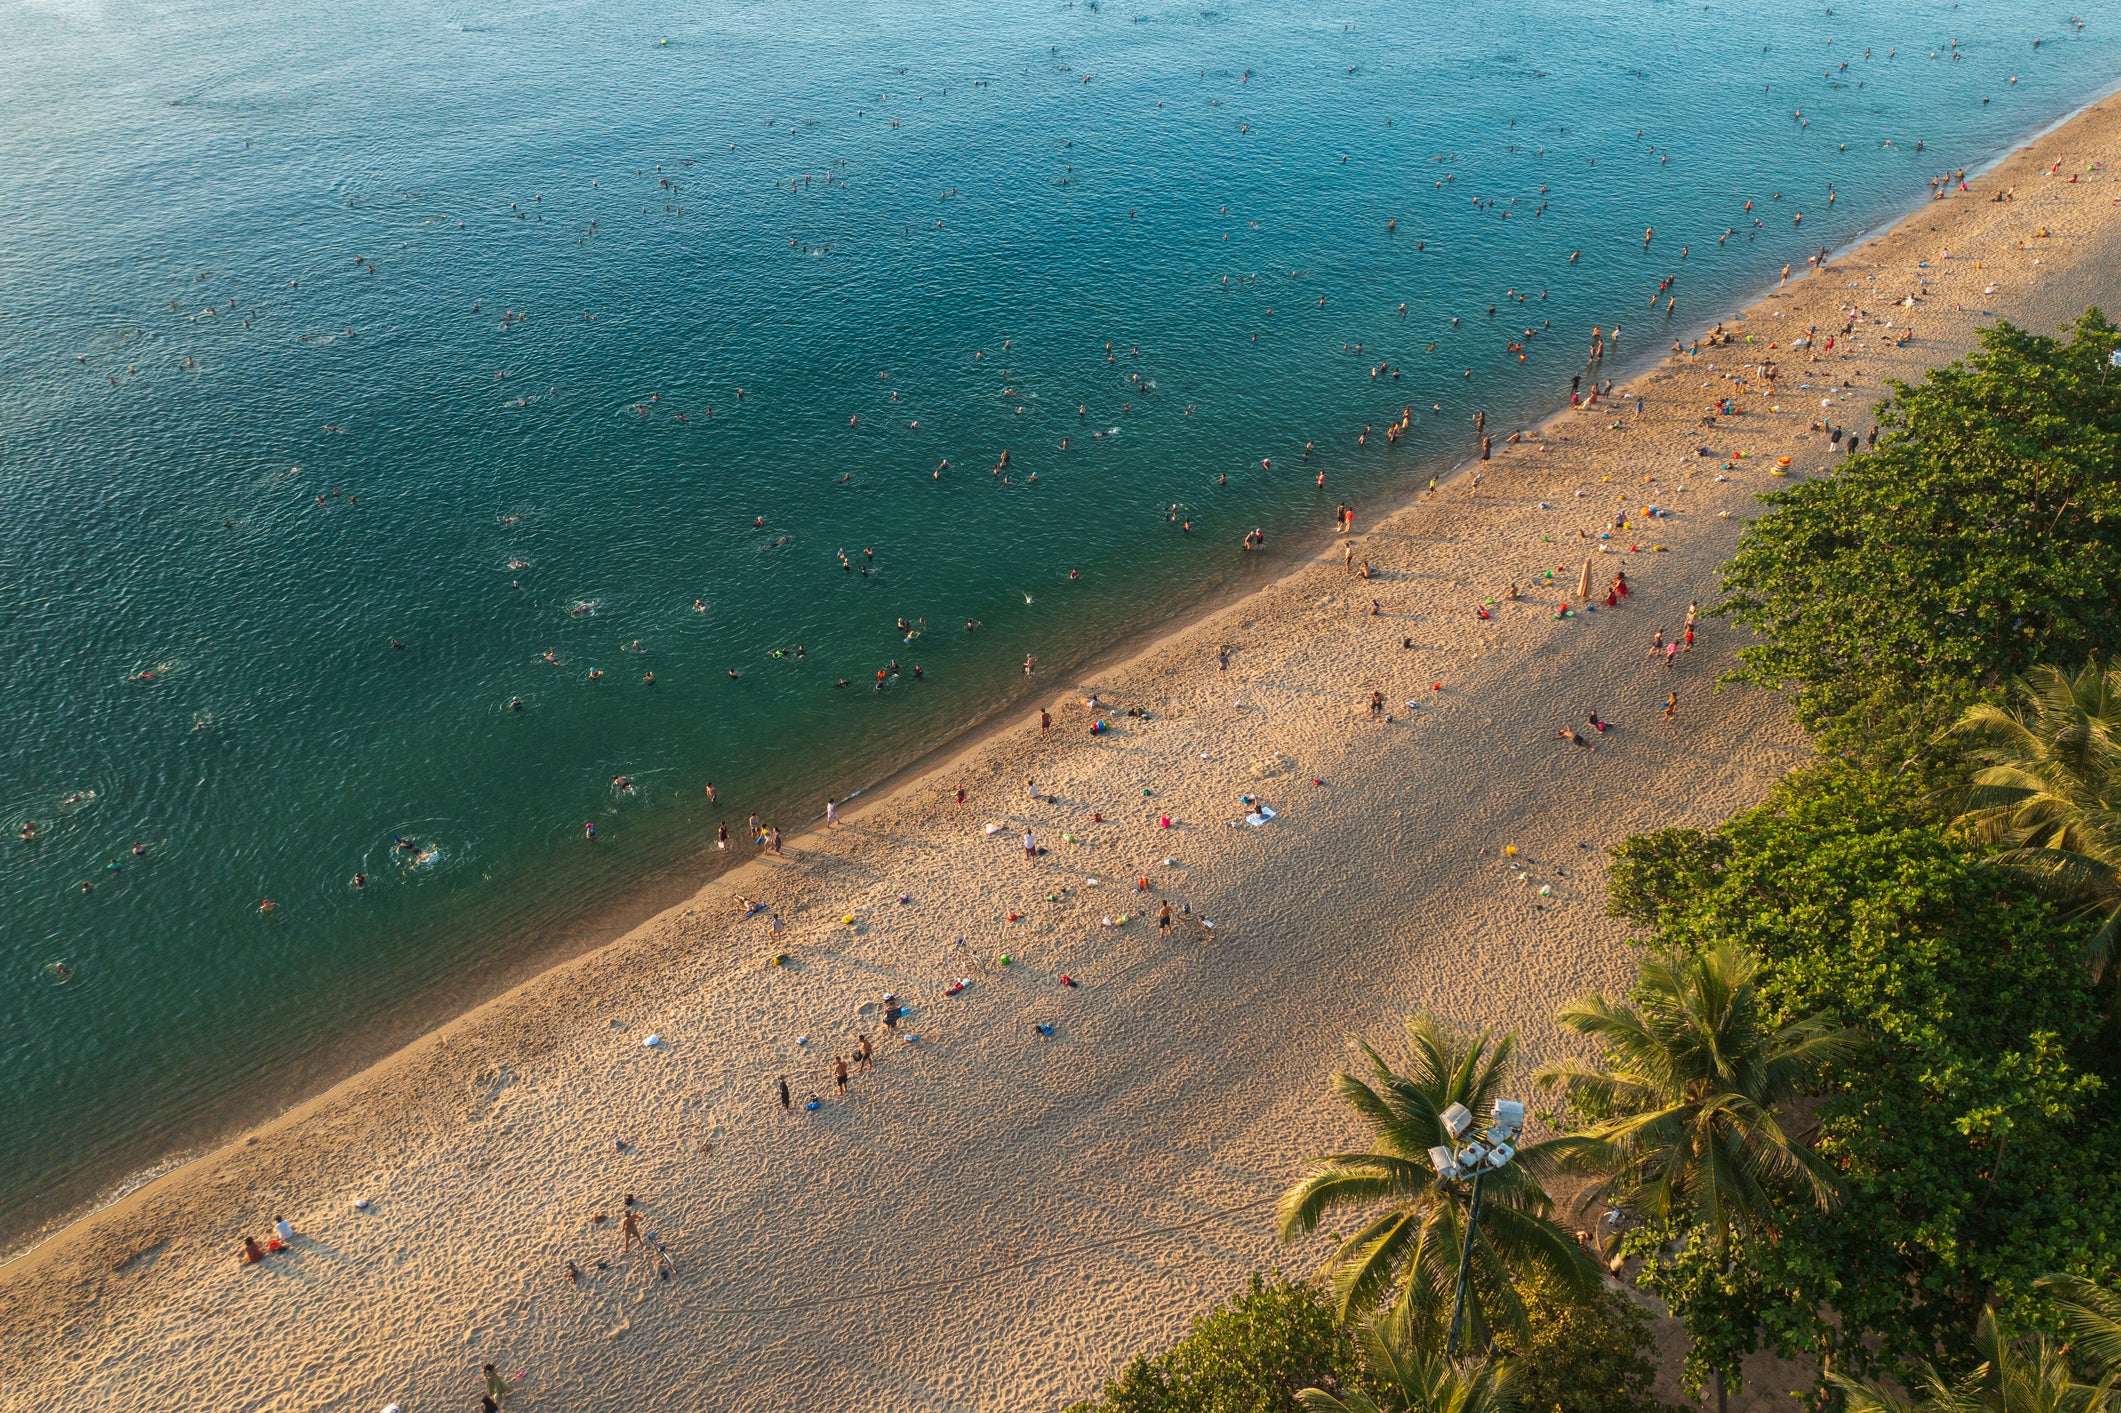 Take a tropical holiday to Nha Trang for a relaxing stay on golden sands